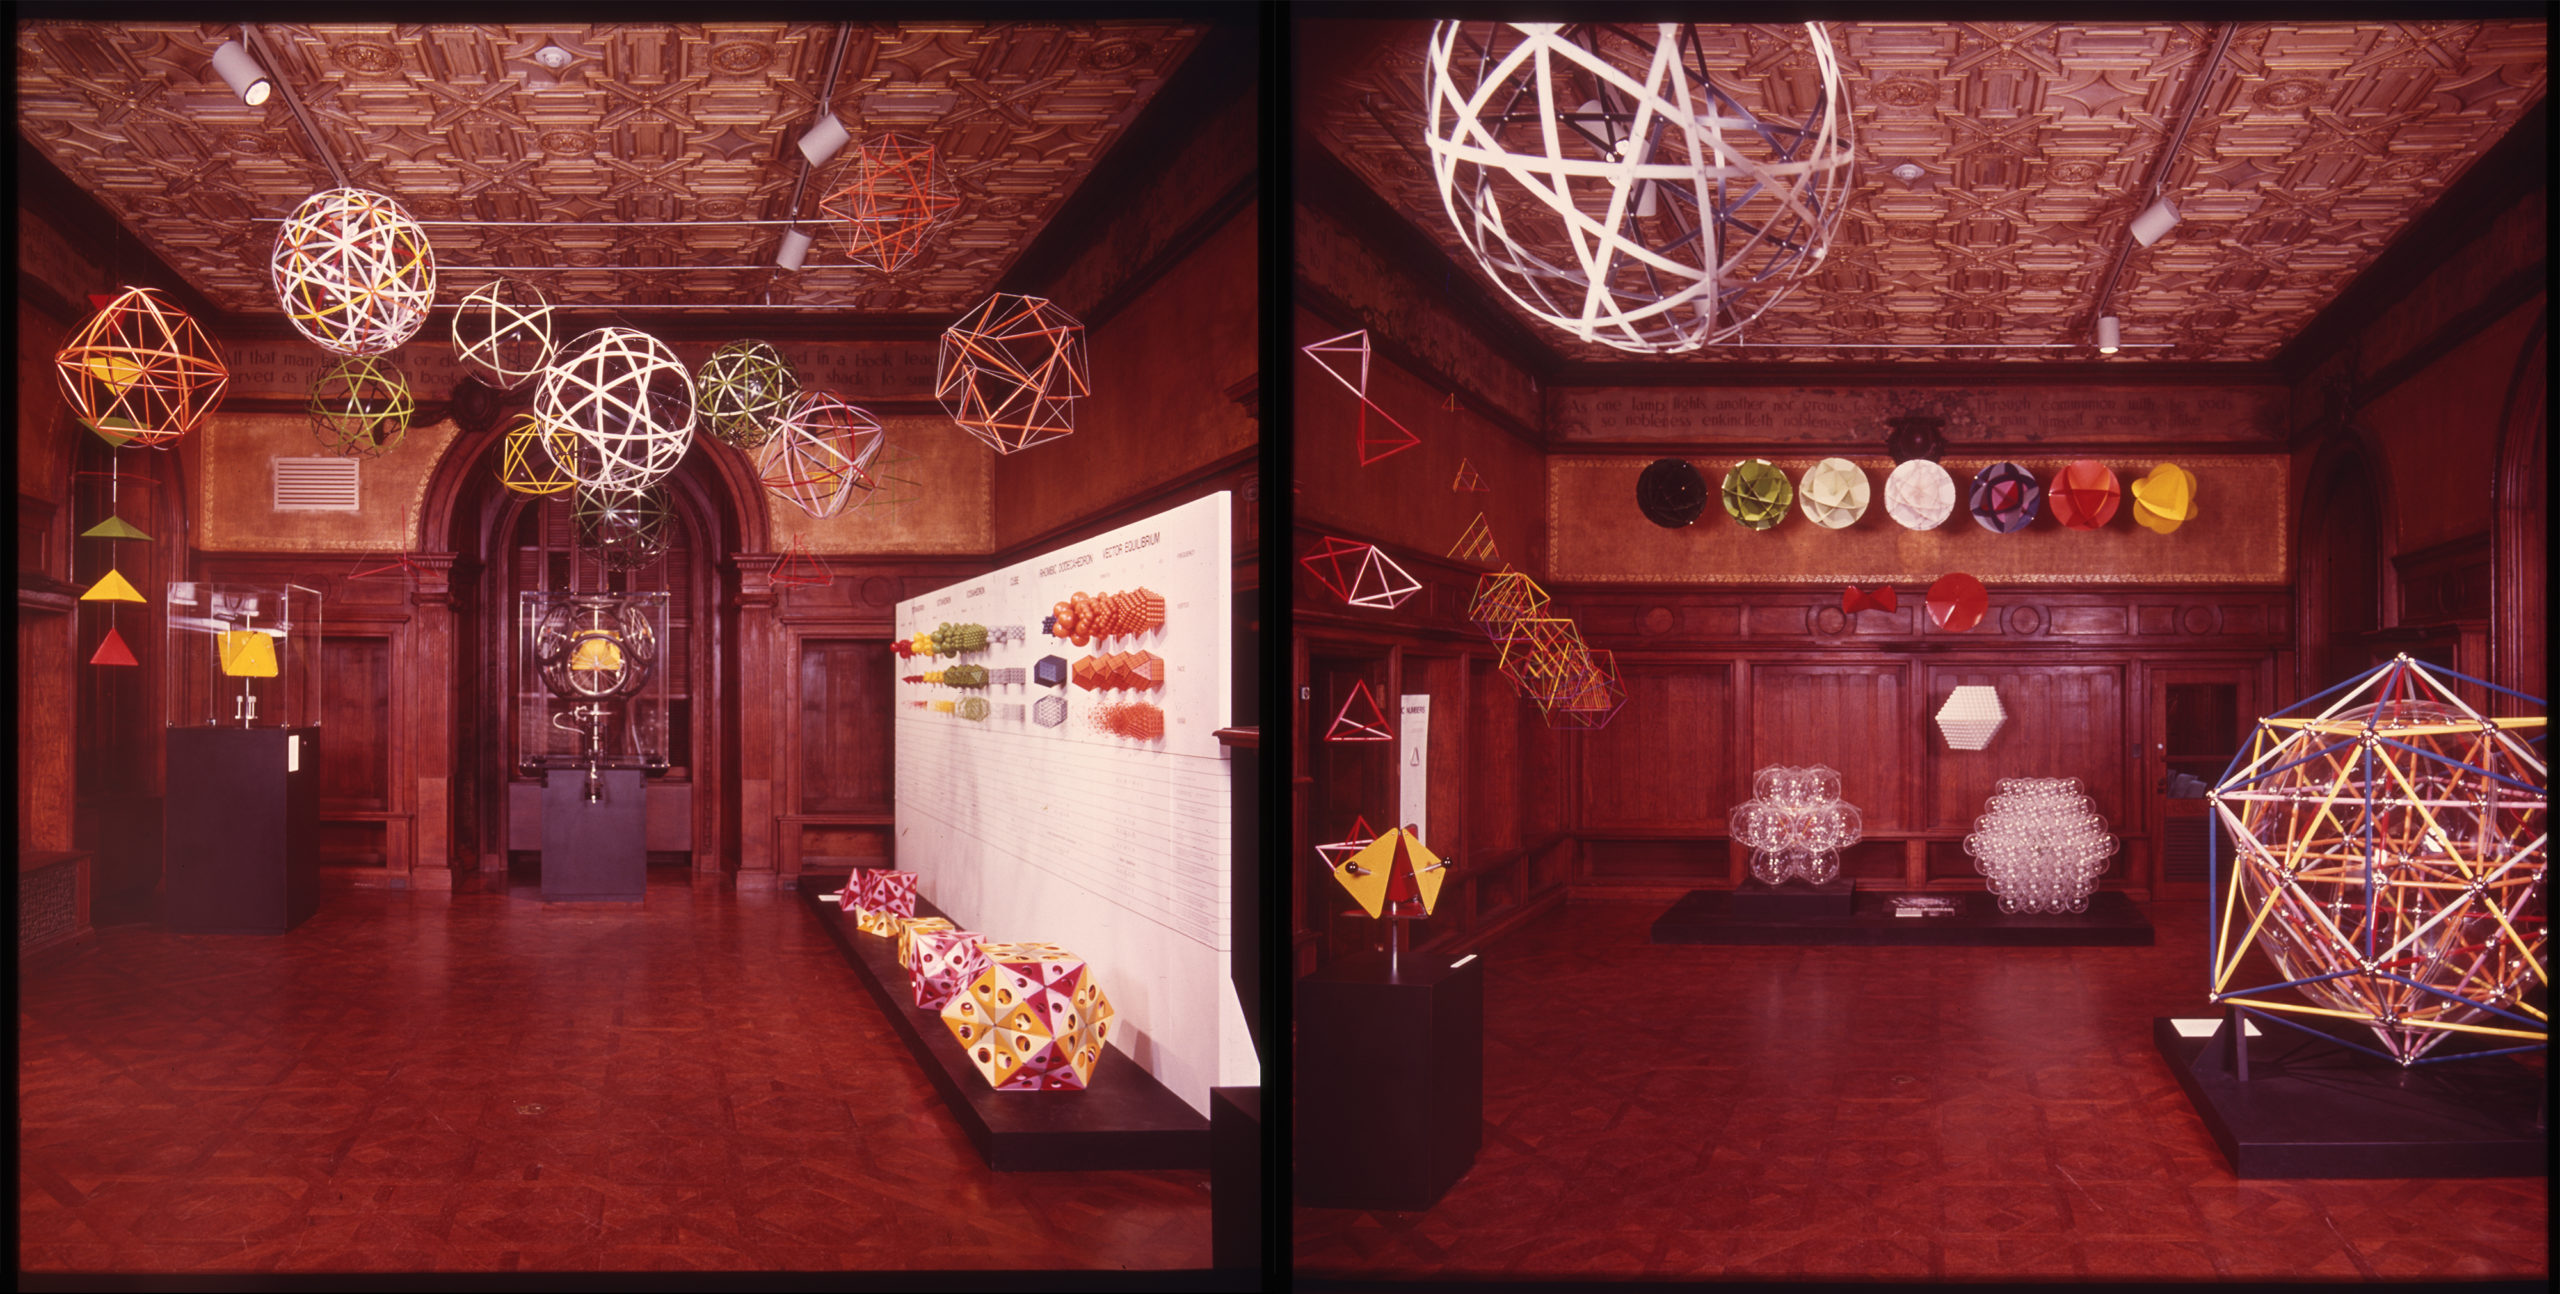 Composite image of two photographs, both picturing an exhibition of geometric structures in a brown wooded room.